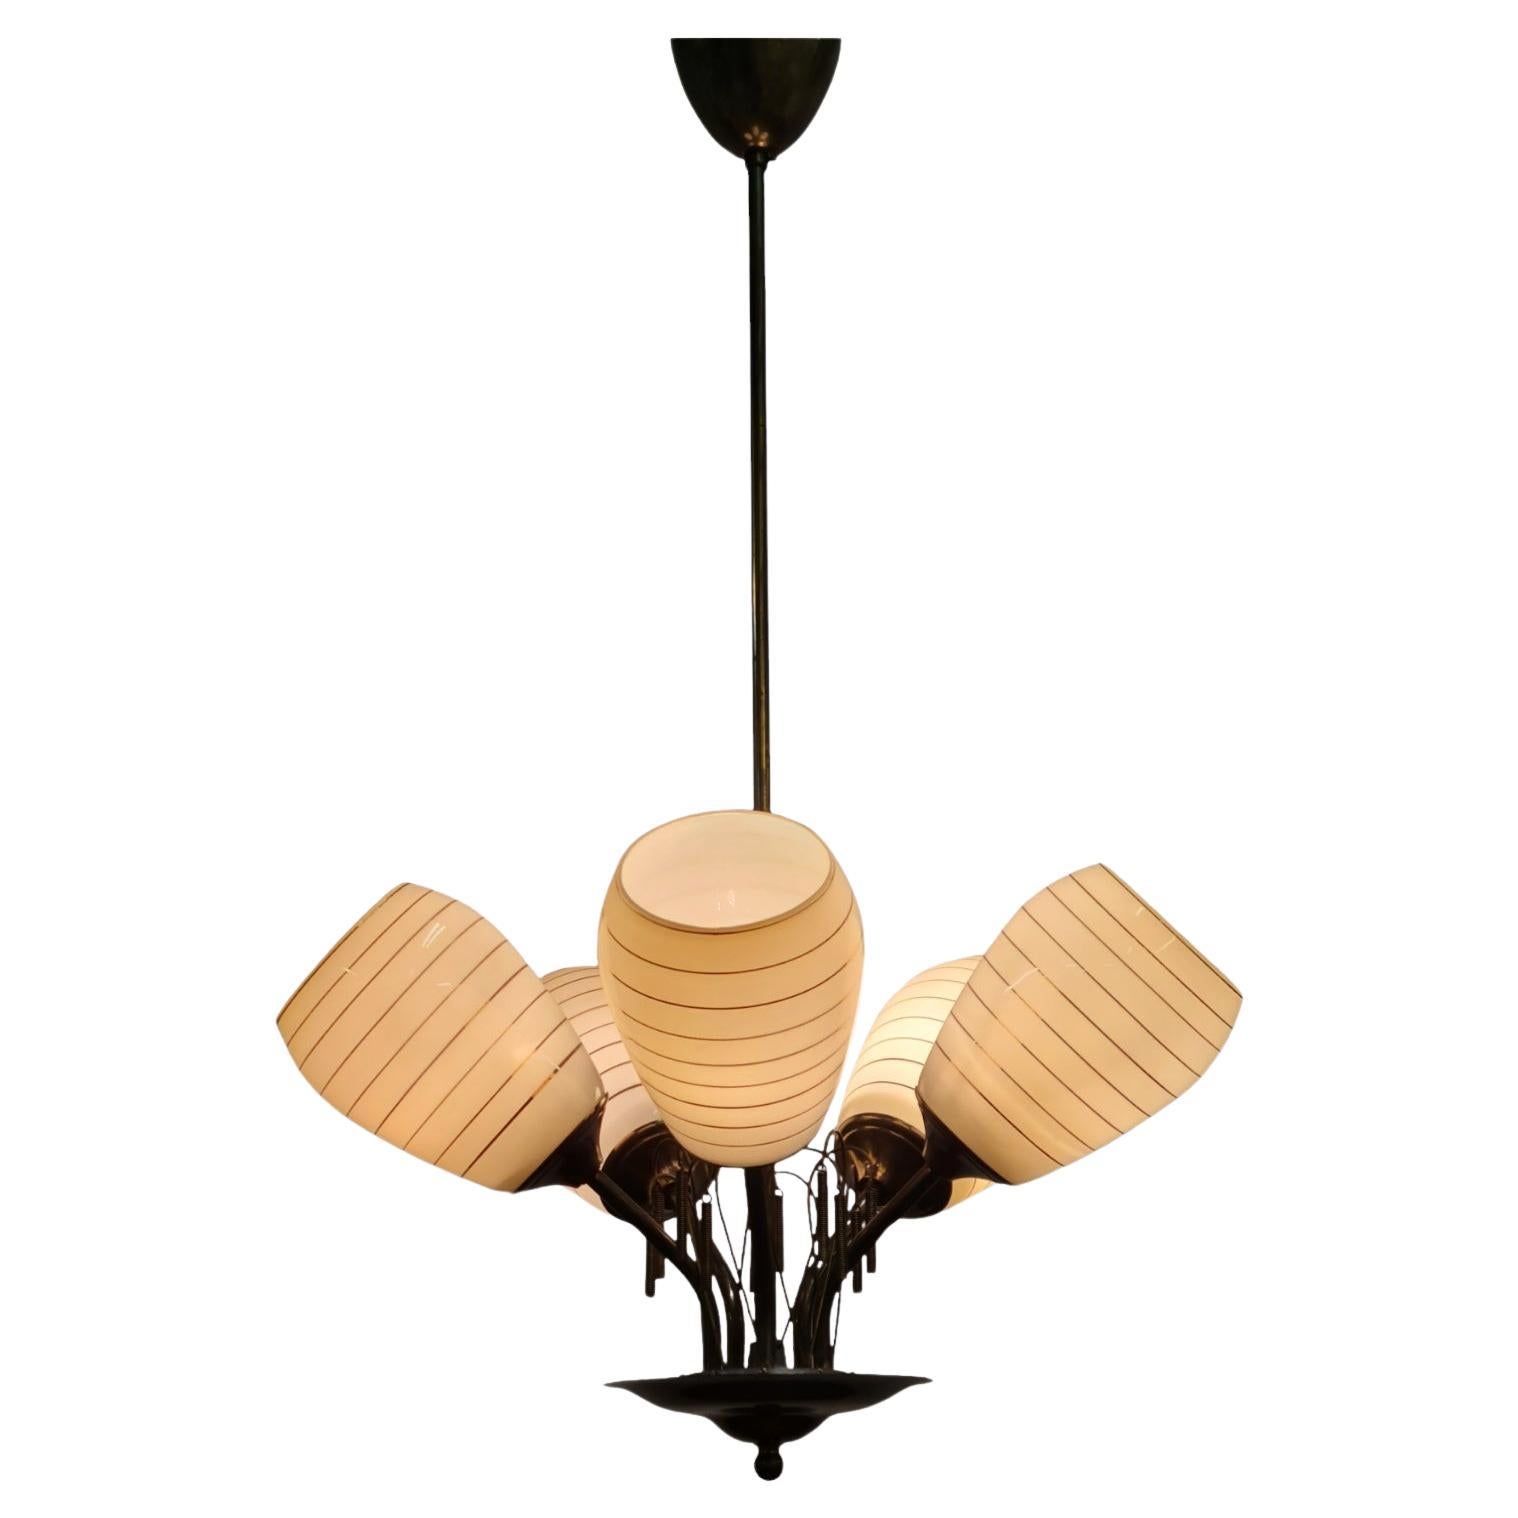 Orno Stockmann Chandeliers and Pendants